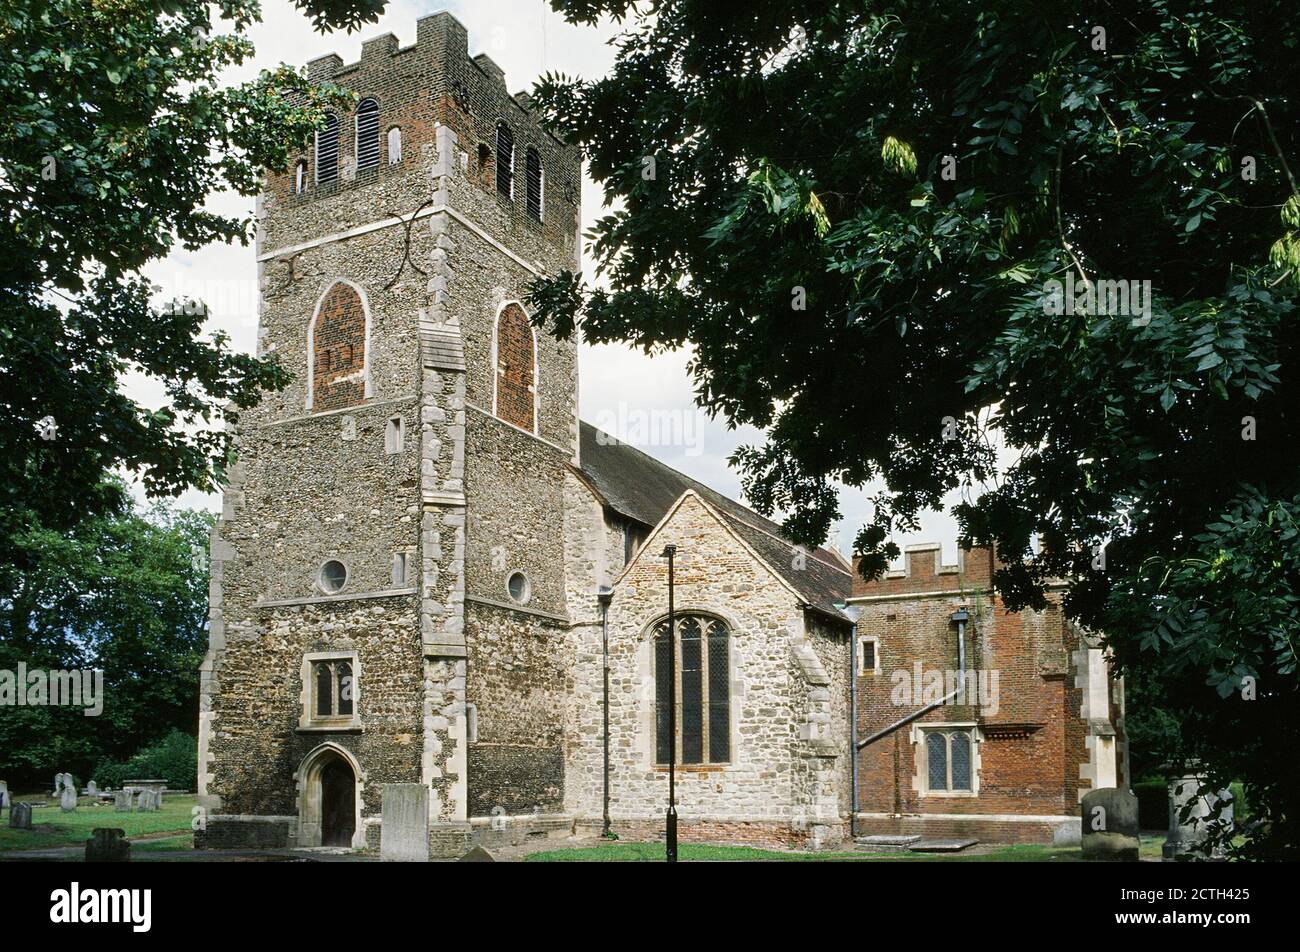 The exterior of the historic All Hallows church at Tottenham, in the London Borough of Haringey, North London UK Stock Photo